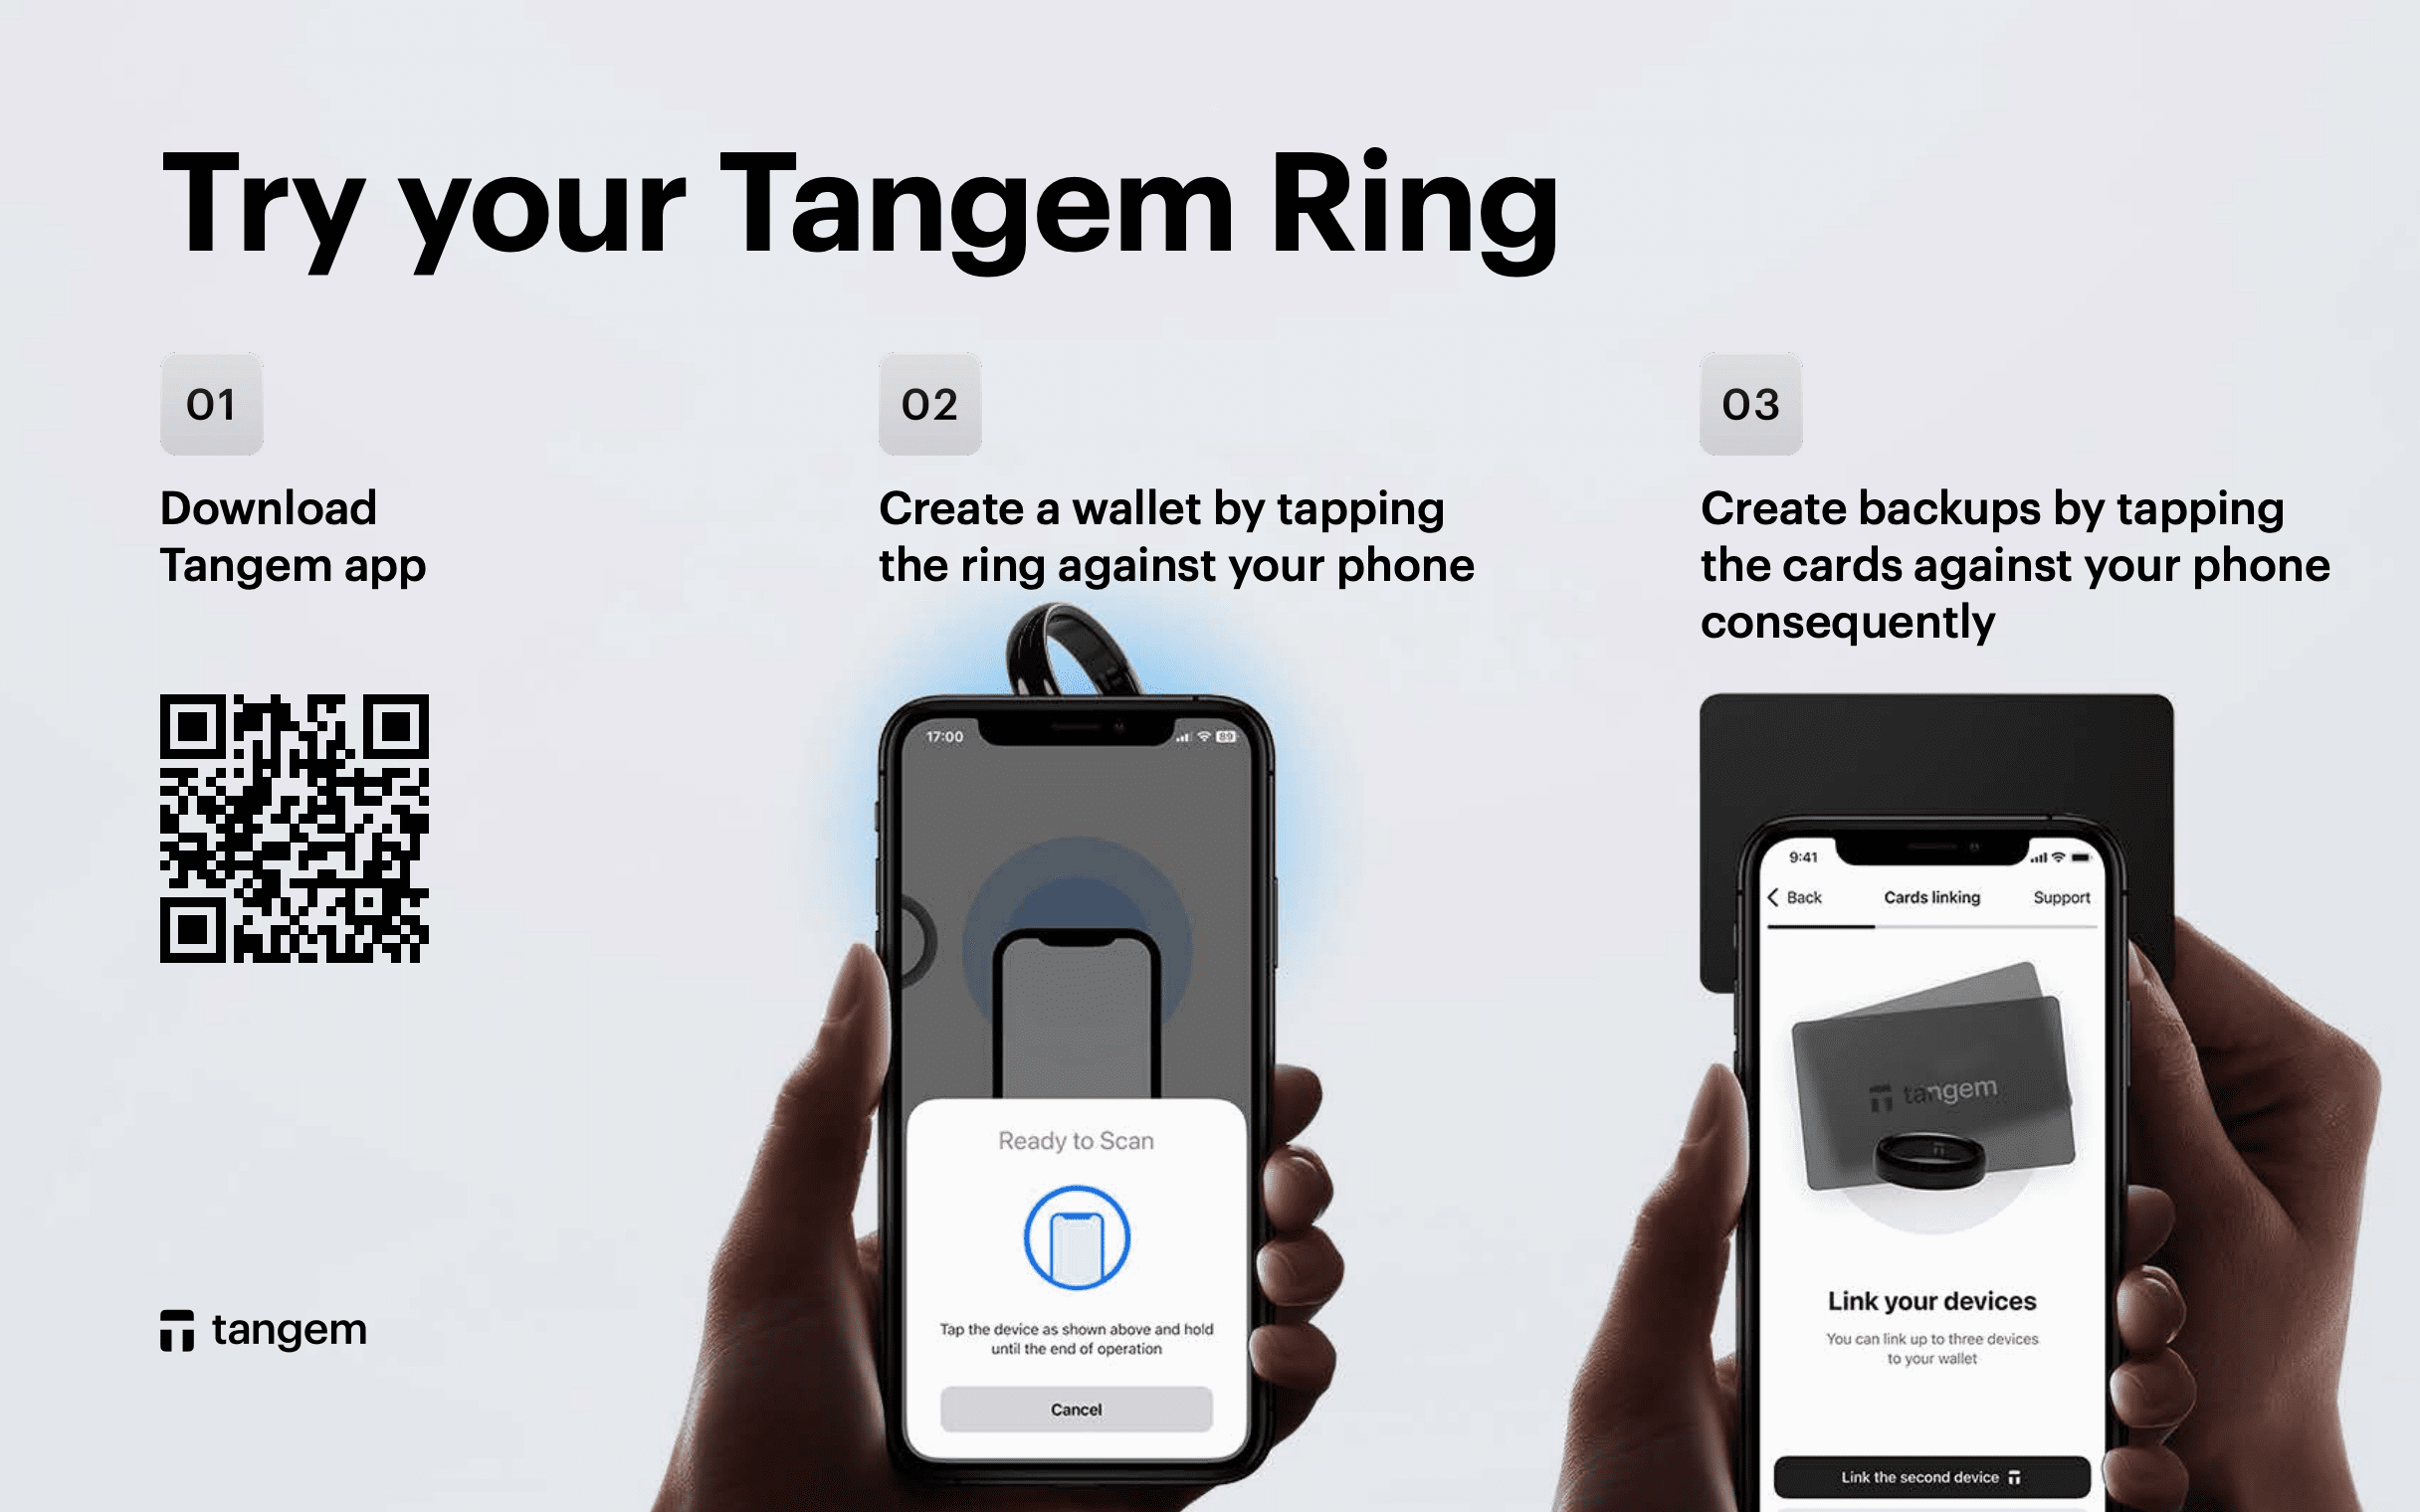 How to use the Tangem Ring